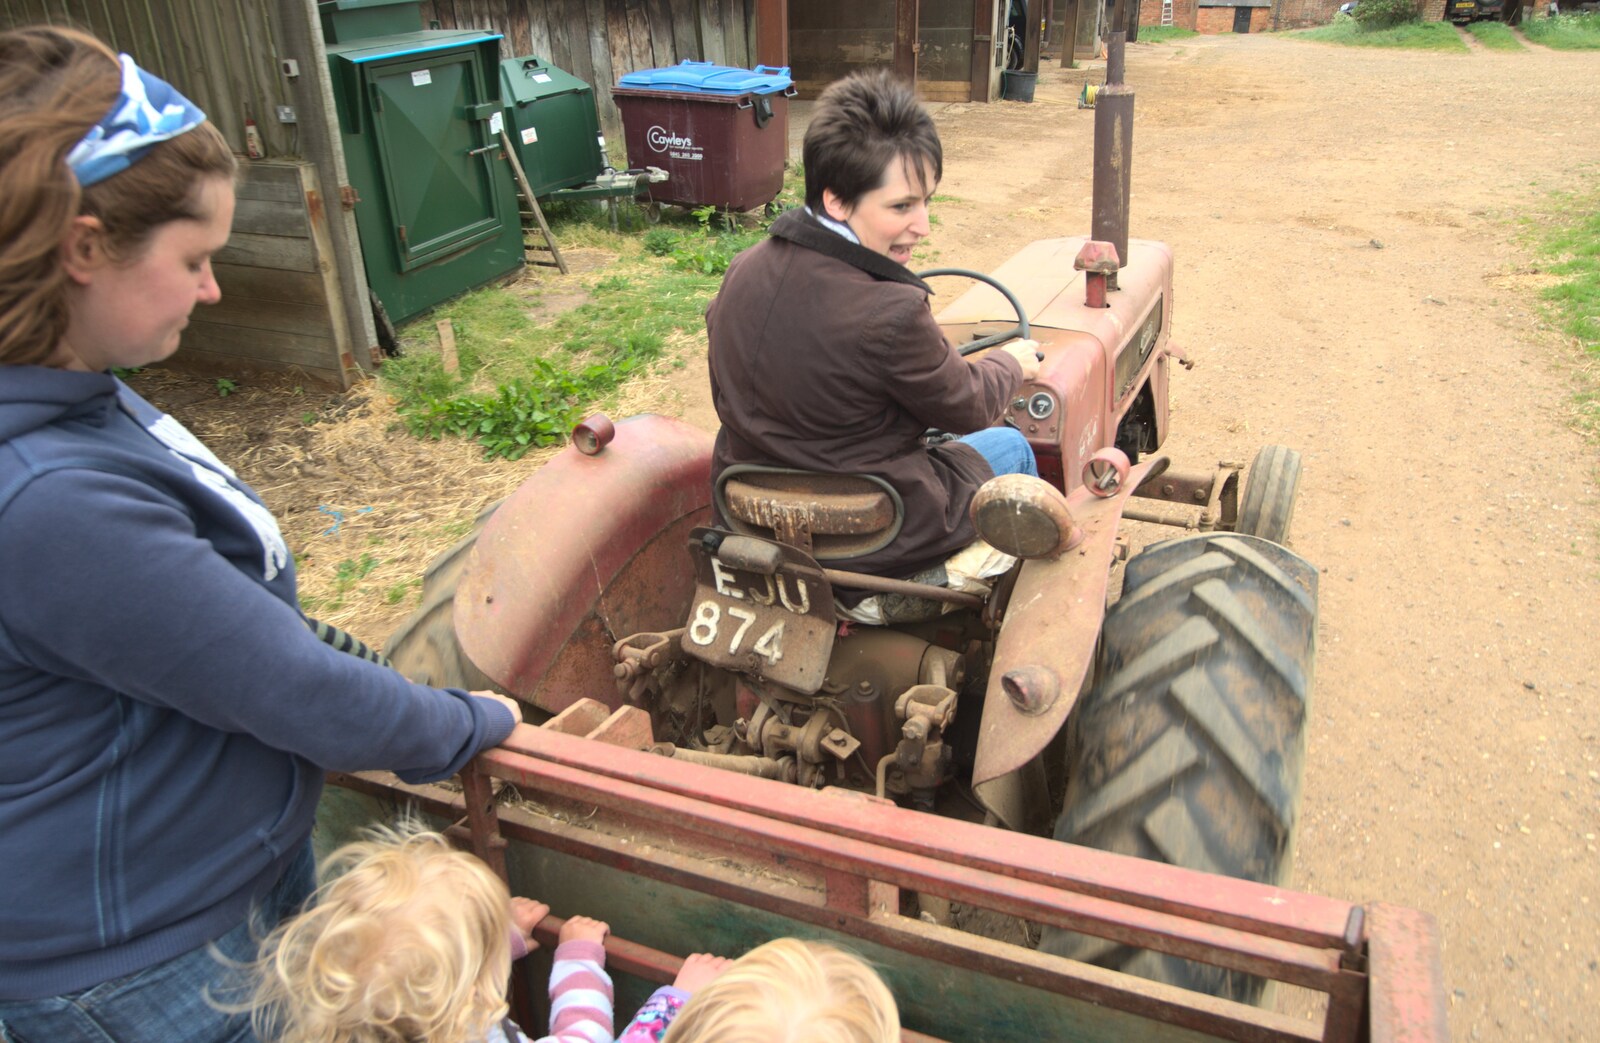 Jemma fires up the old International tractor from A Christening, Wilford, Northamptonshire - 22nd May 2011